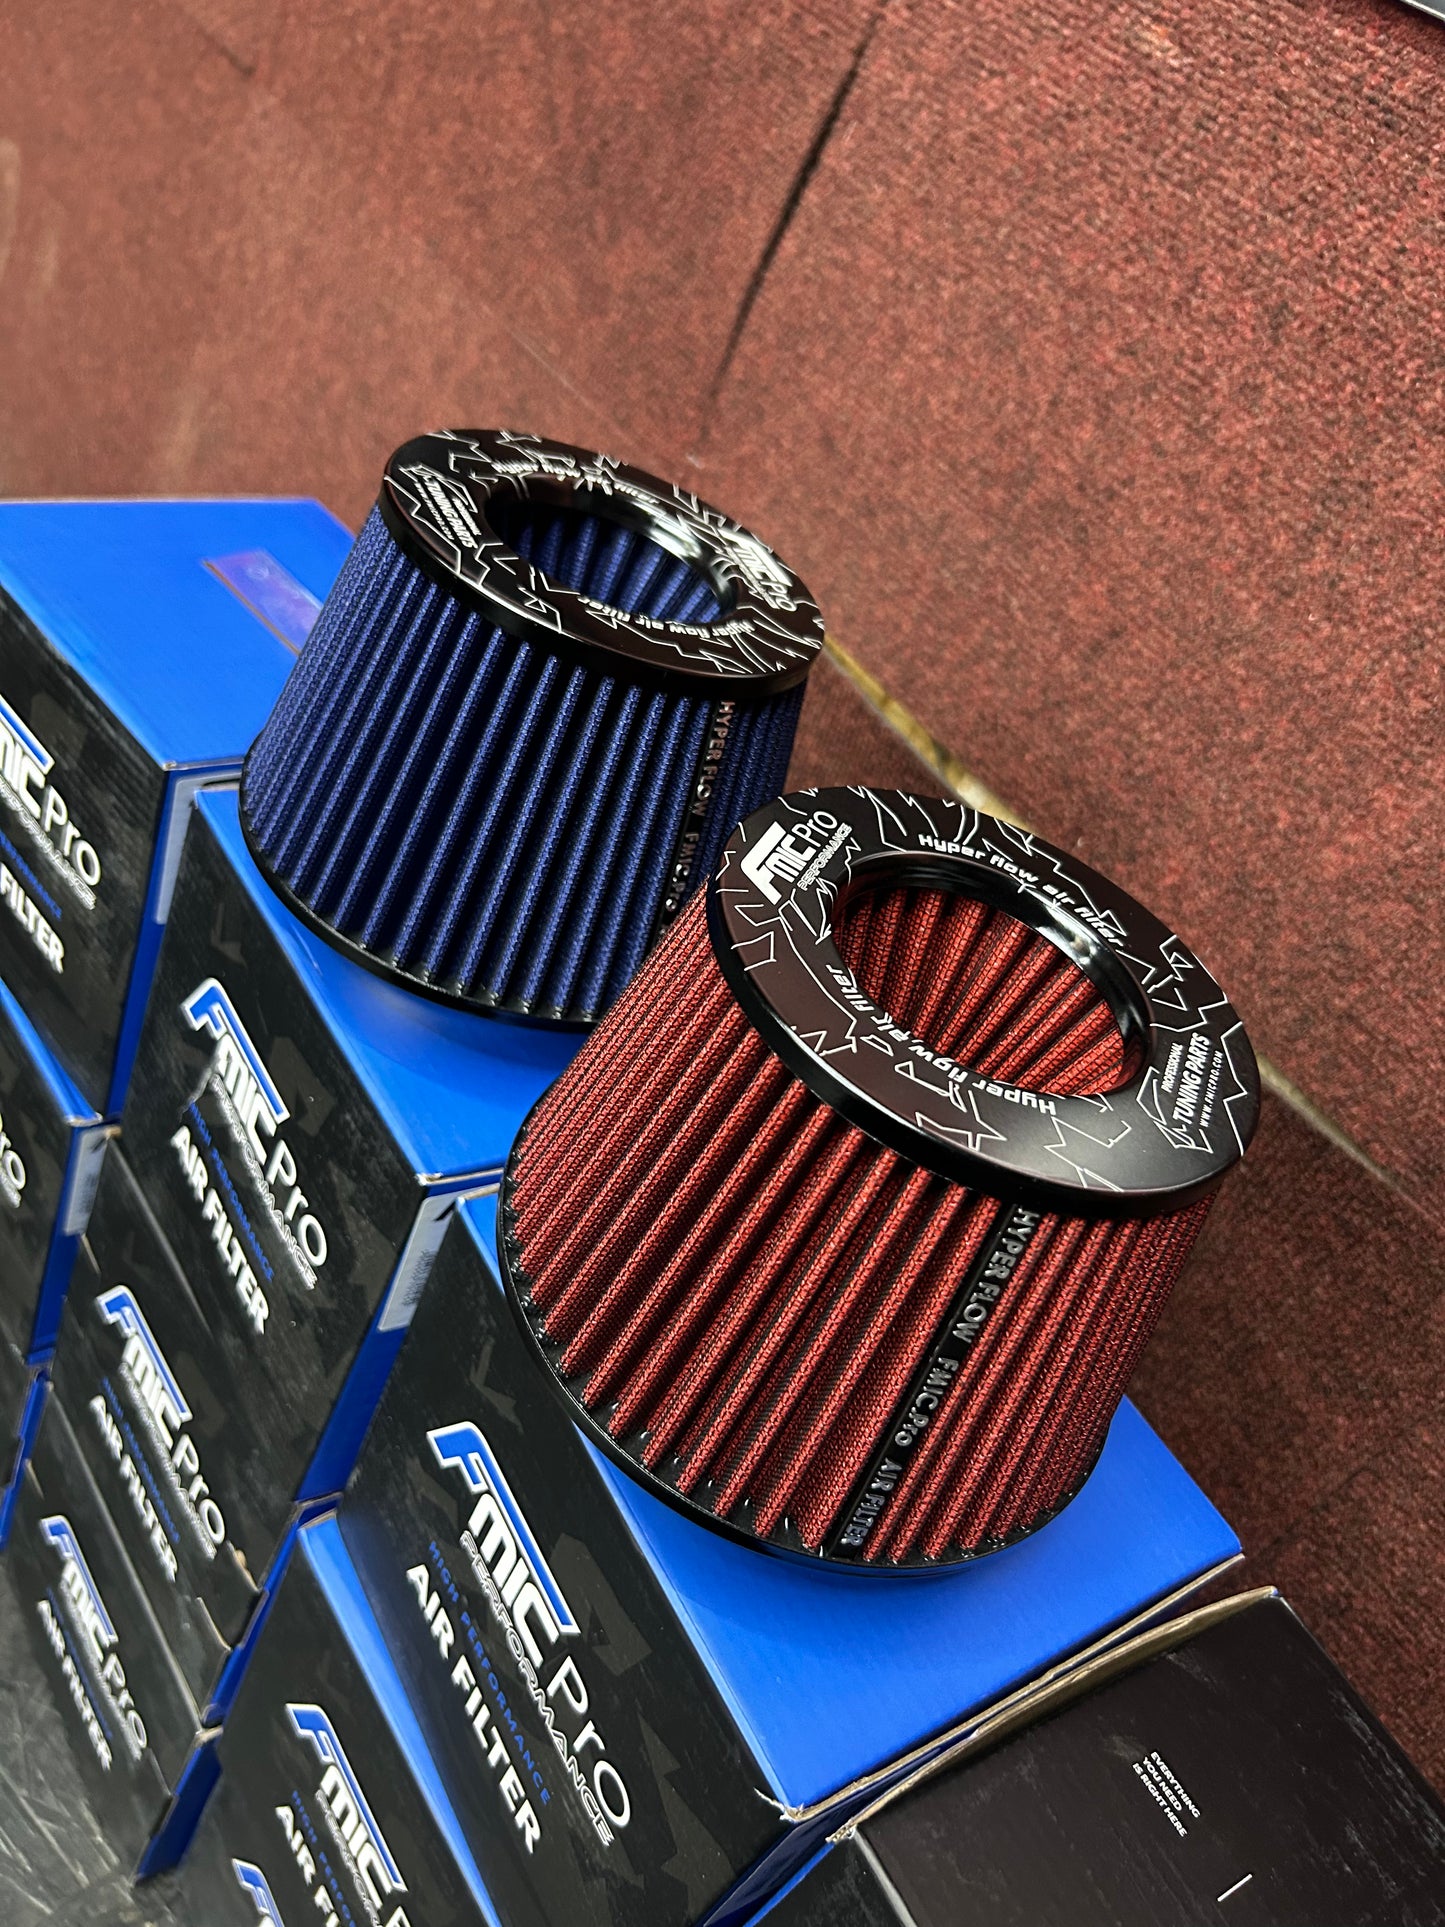 76mm cone filter